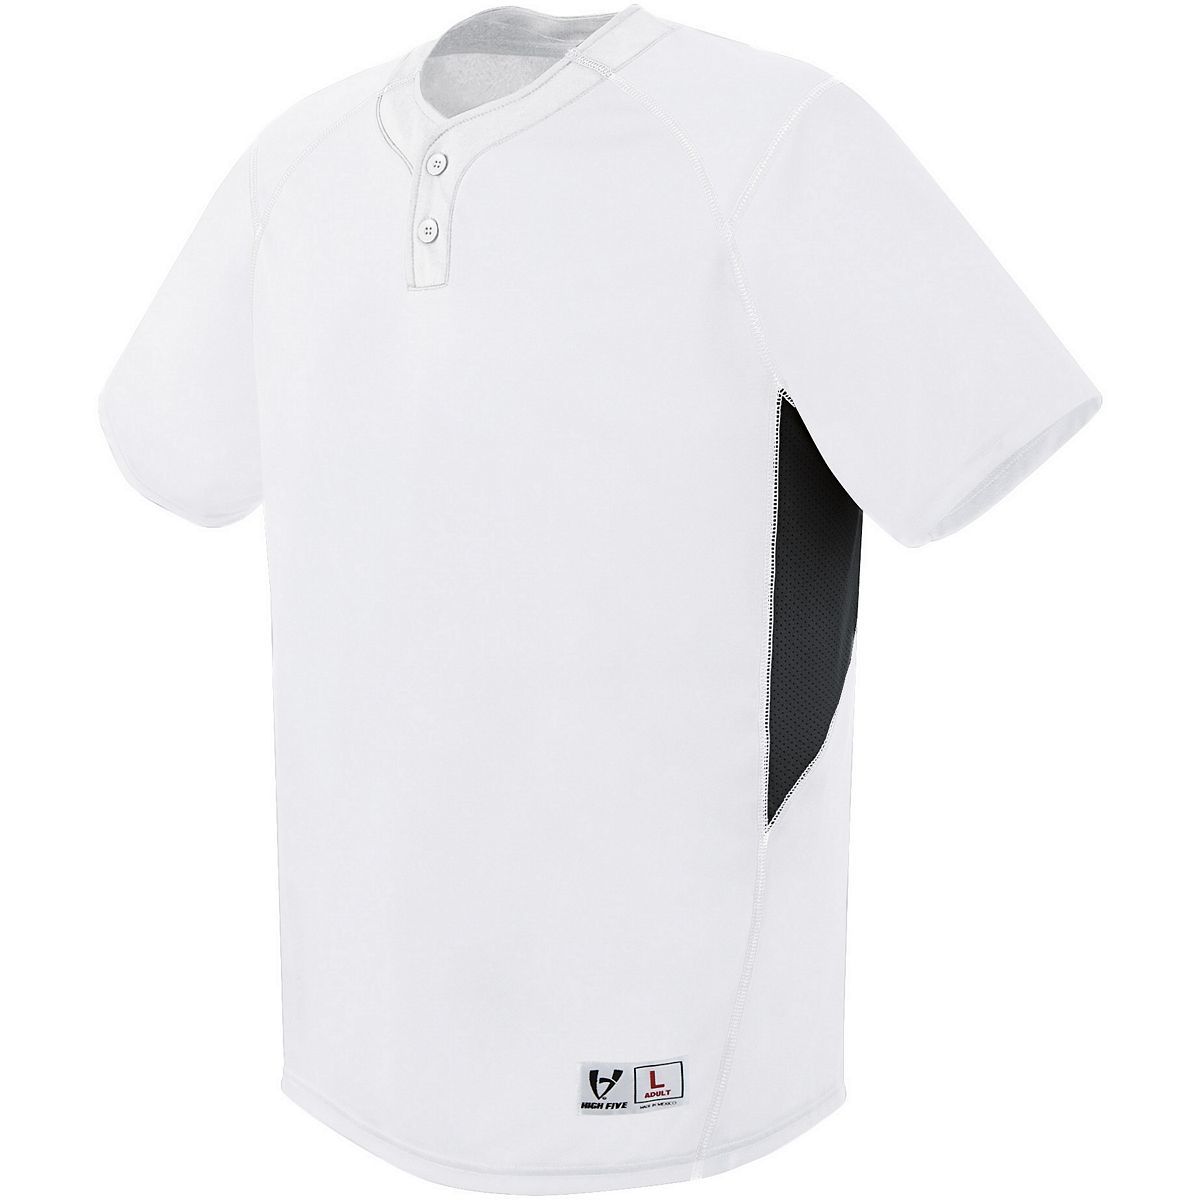 Augusta Sportswear Bandit Two-Button Jersey in White/Black/White  -Part of the Adult, Adult-Jersey, Augusta-Products, Baseball, Shirts, All-Sports, All-Sports-1 product lines at KanaleyCreations.com